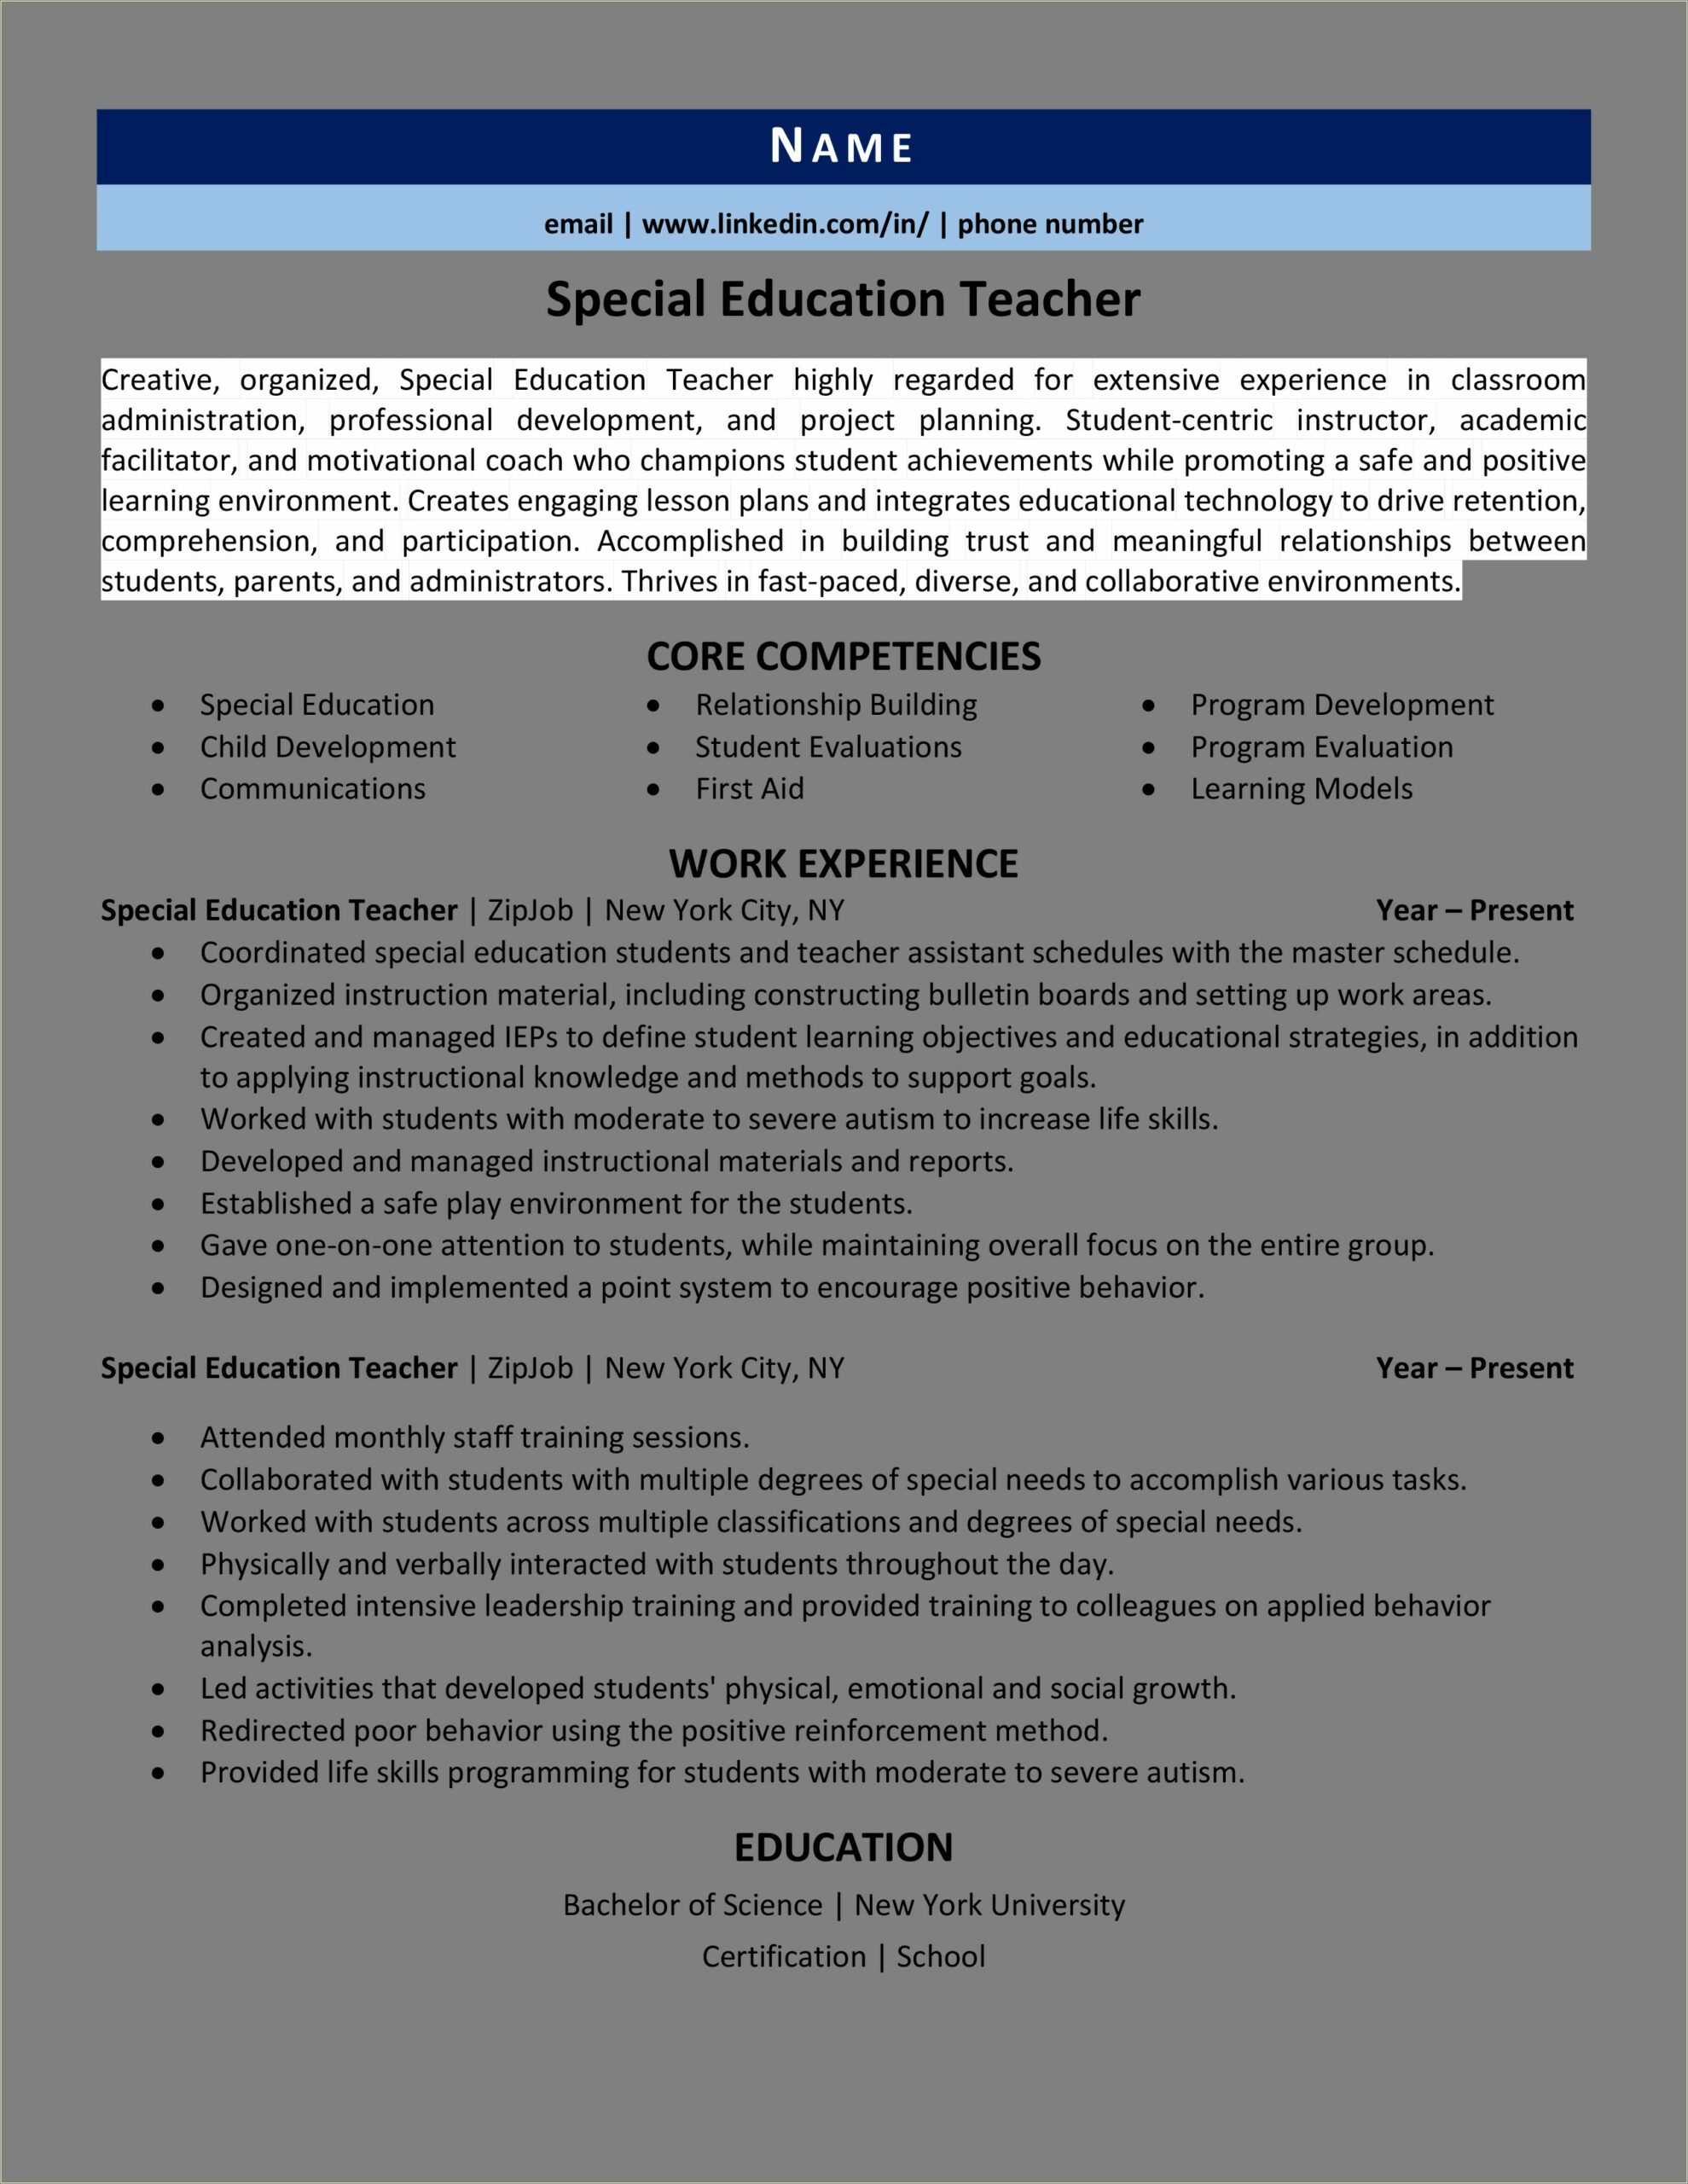 Examples Of Objectives For Teaching Resume